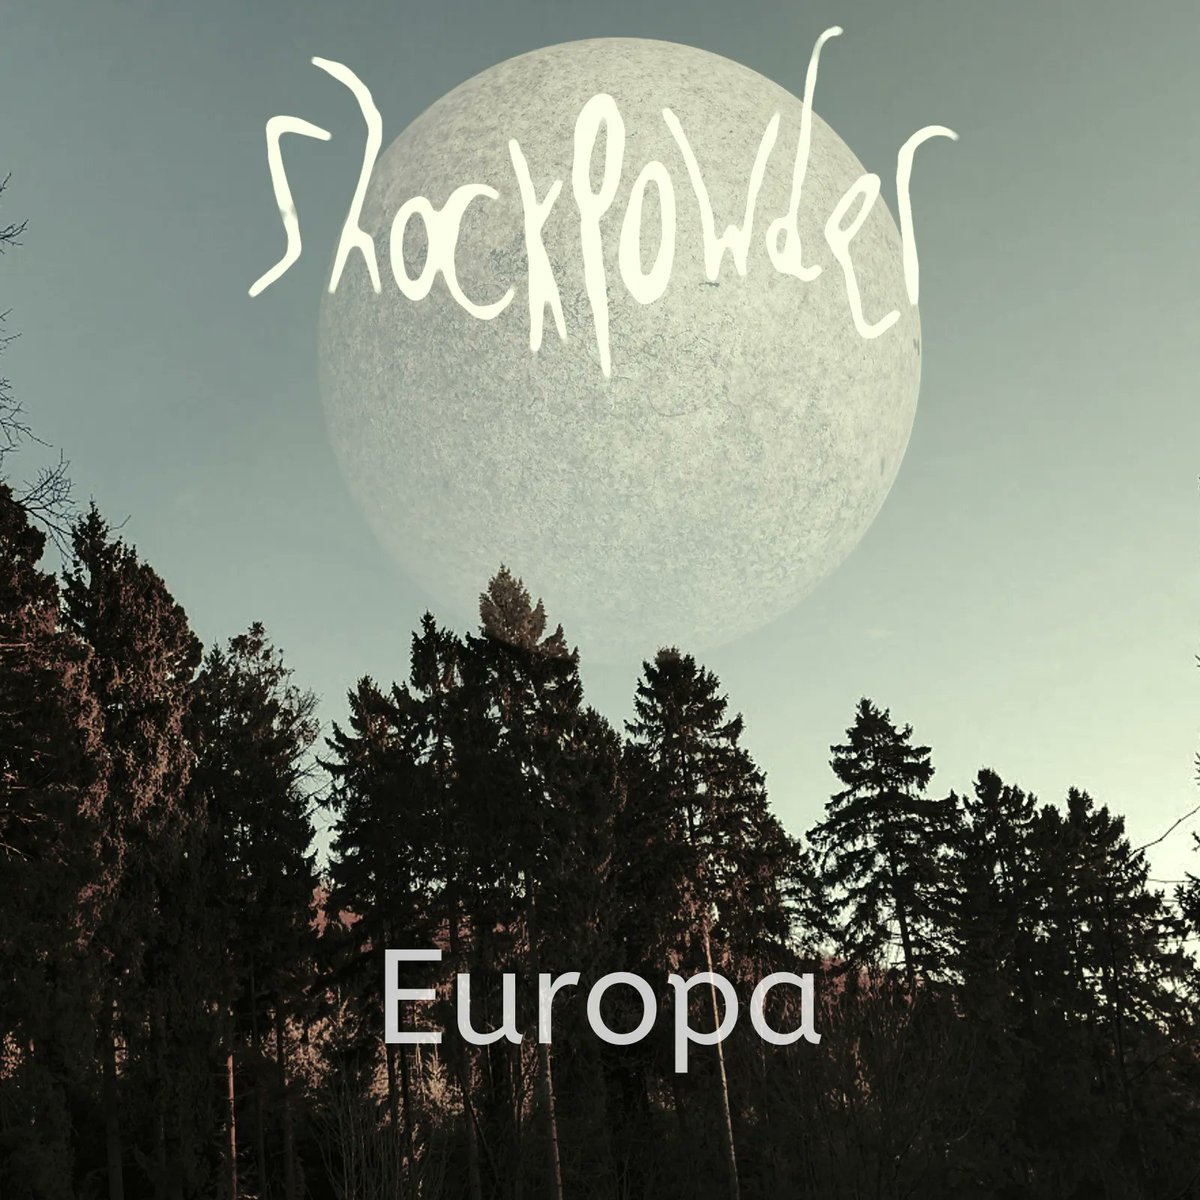 Listen to the single 'Europa' and appreciate the cool sound of the new track from the inimitable @Shockpowder
#indiedockmusicblog #singlereview #postrock #alternativerock #cinematic #experimental

indiedockmusicblog.co.uk/?p=17655